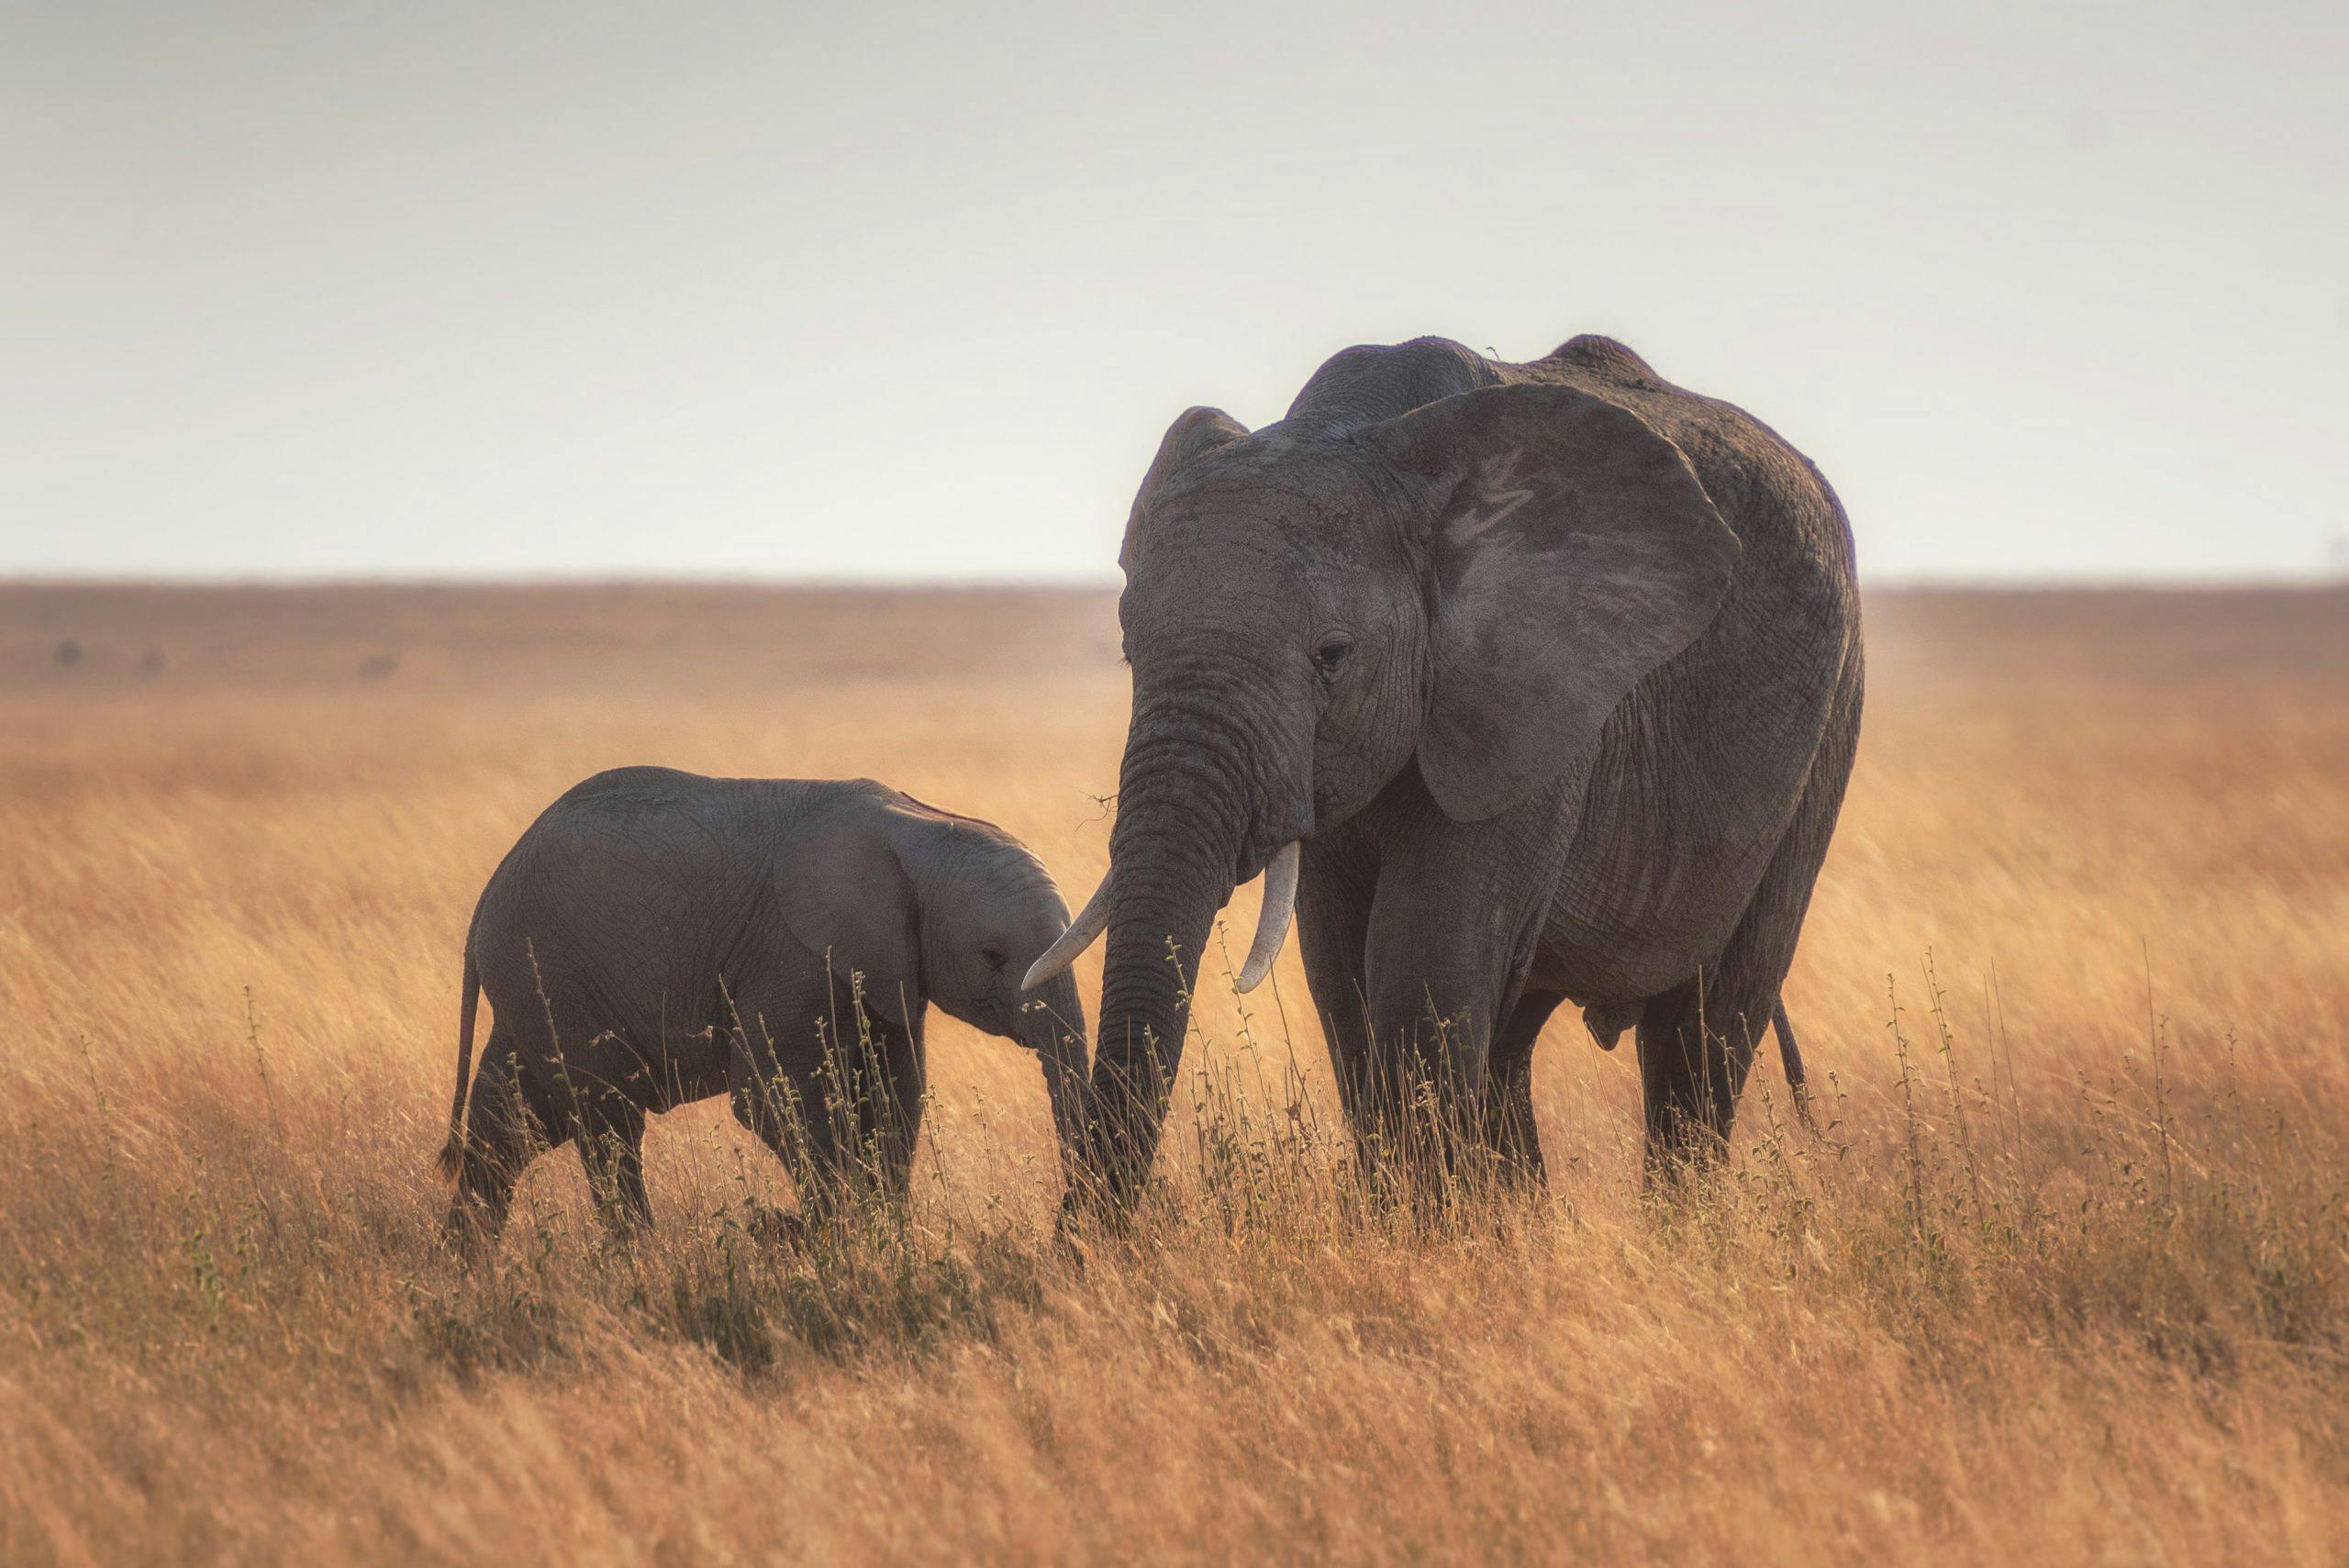 Elephant and baby elephant in the wild